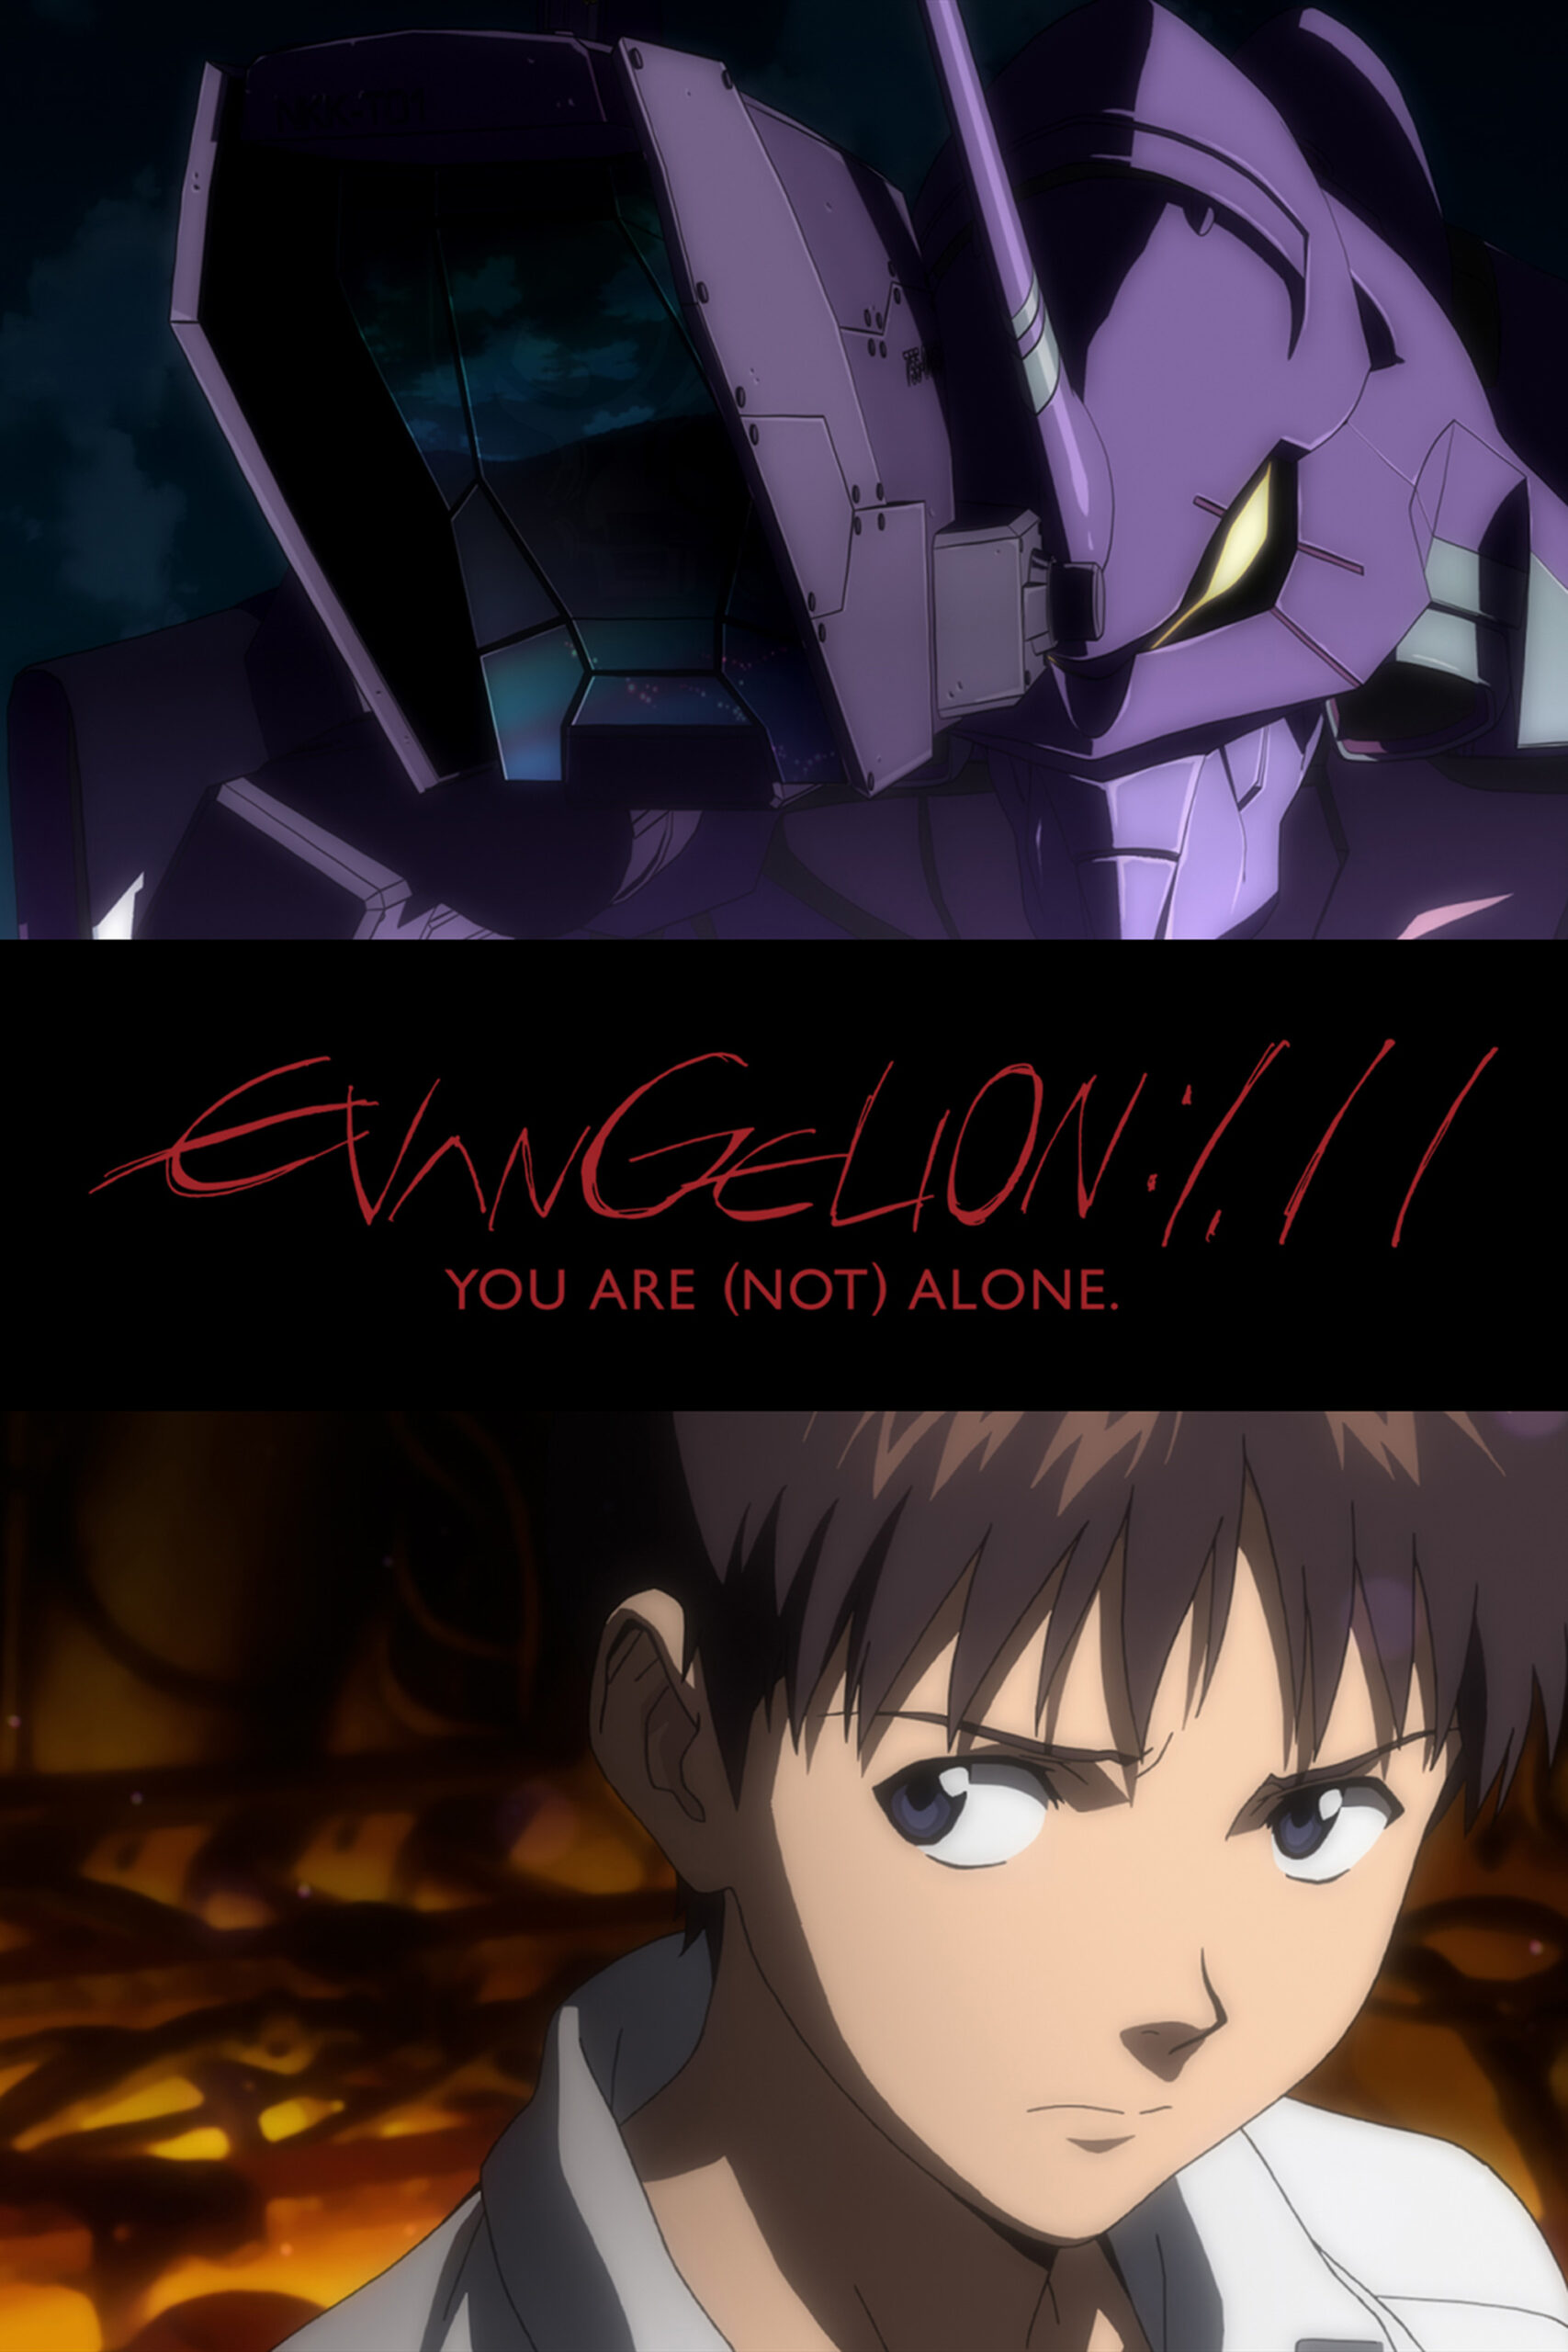 Evangelion 1.11 you are (not) alone